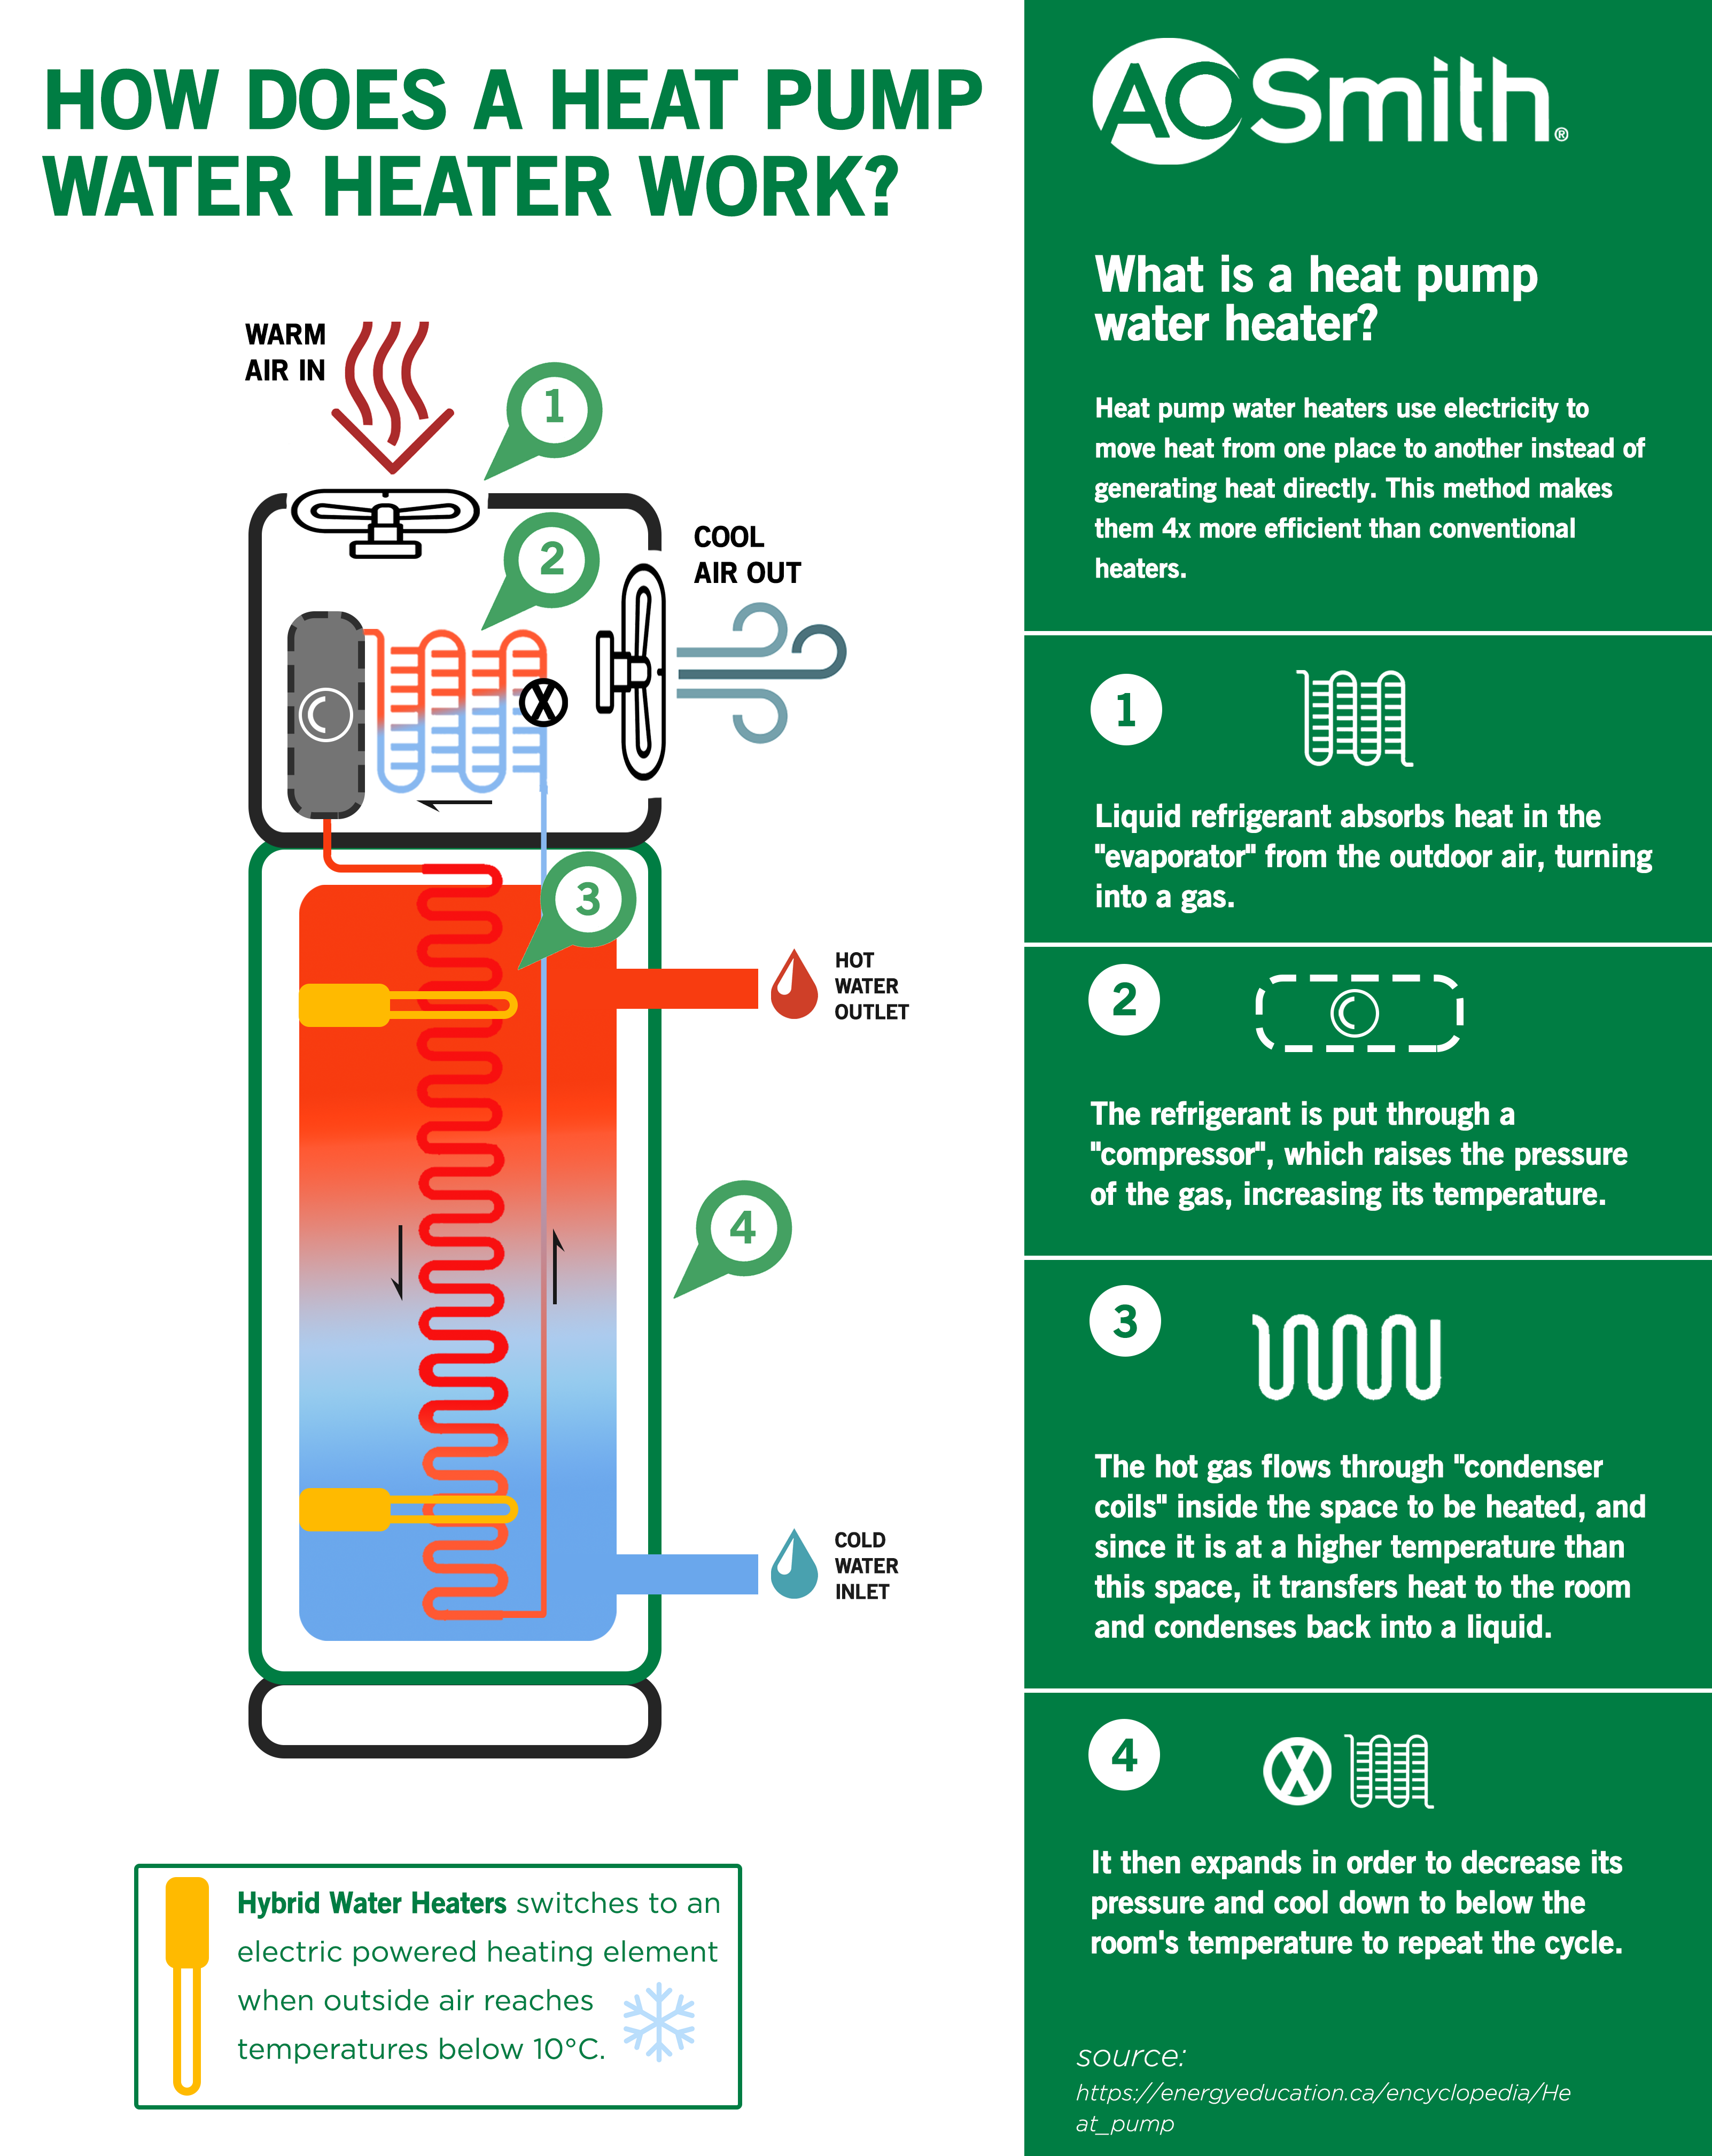 HOW A HYBRID HEAT PUMP WATER HEATER WORKS AND IT'S PARTS